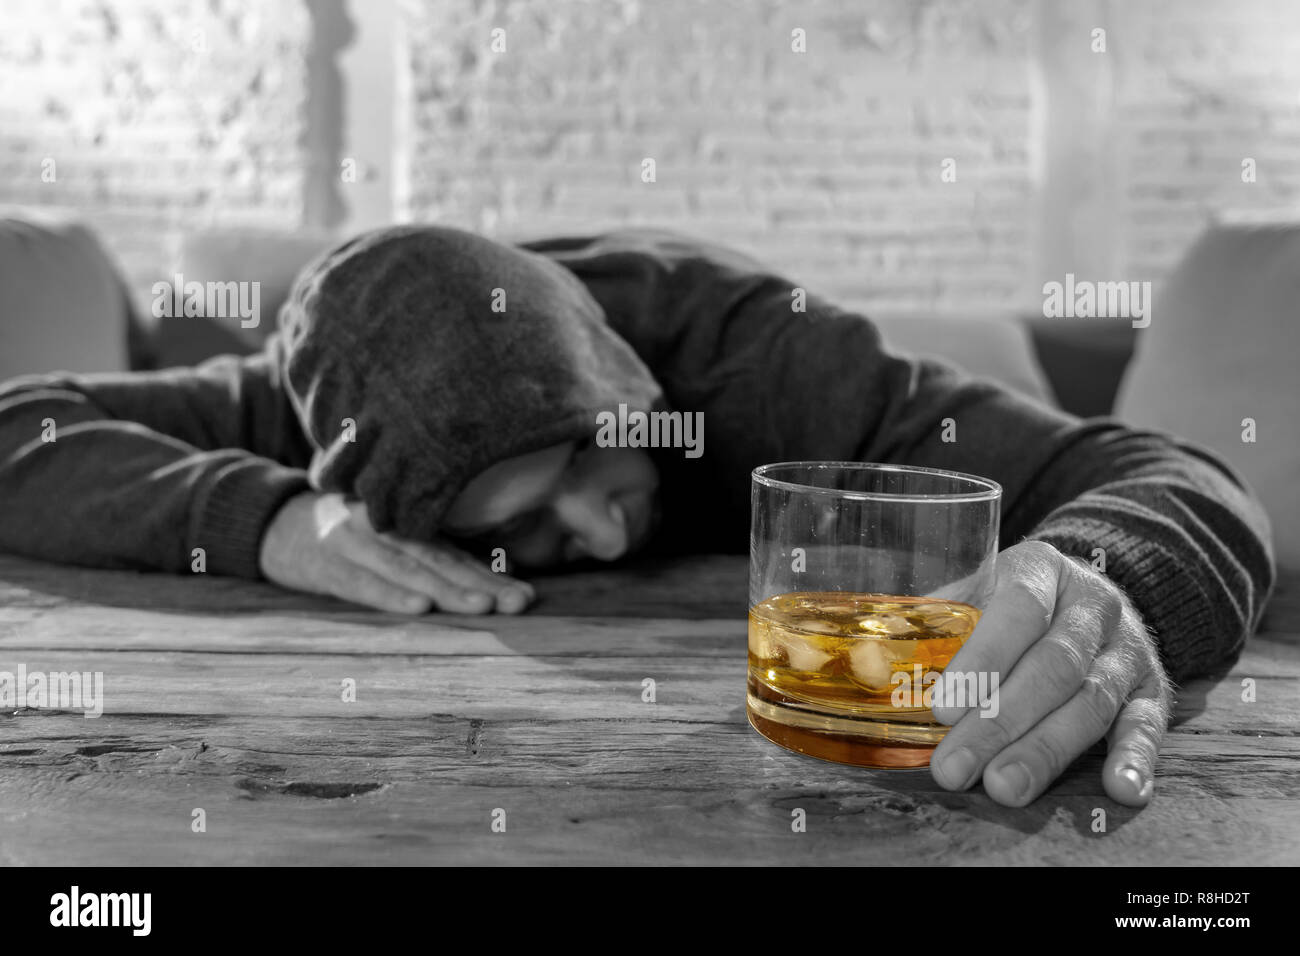 Drunk young man drinking alcohol at home felling lonely depressed and sick holding a glass of whiskey image in white and black and drink in color in A Stock Photo